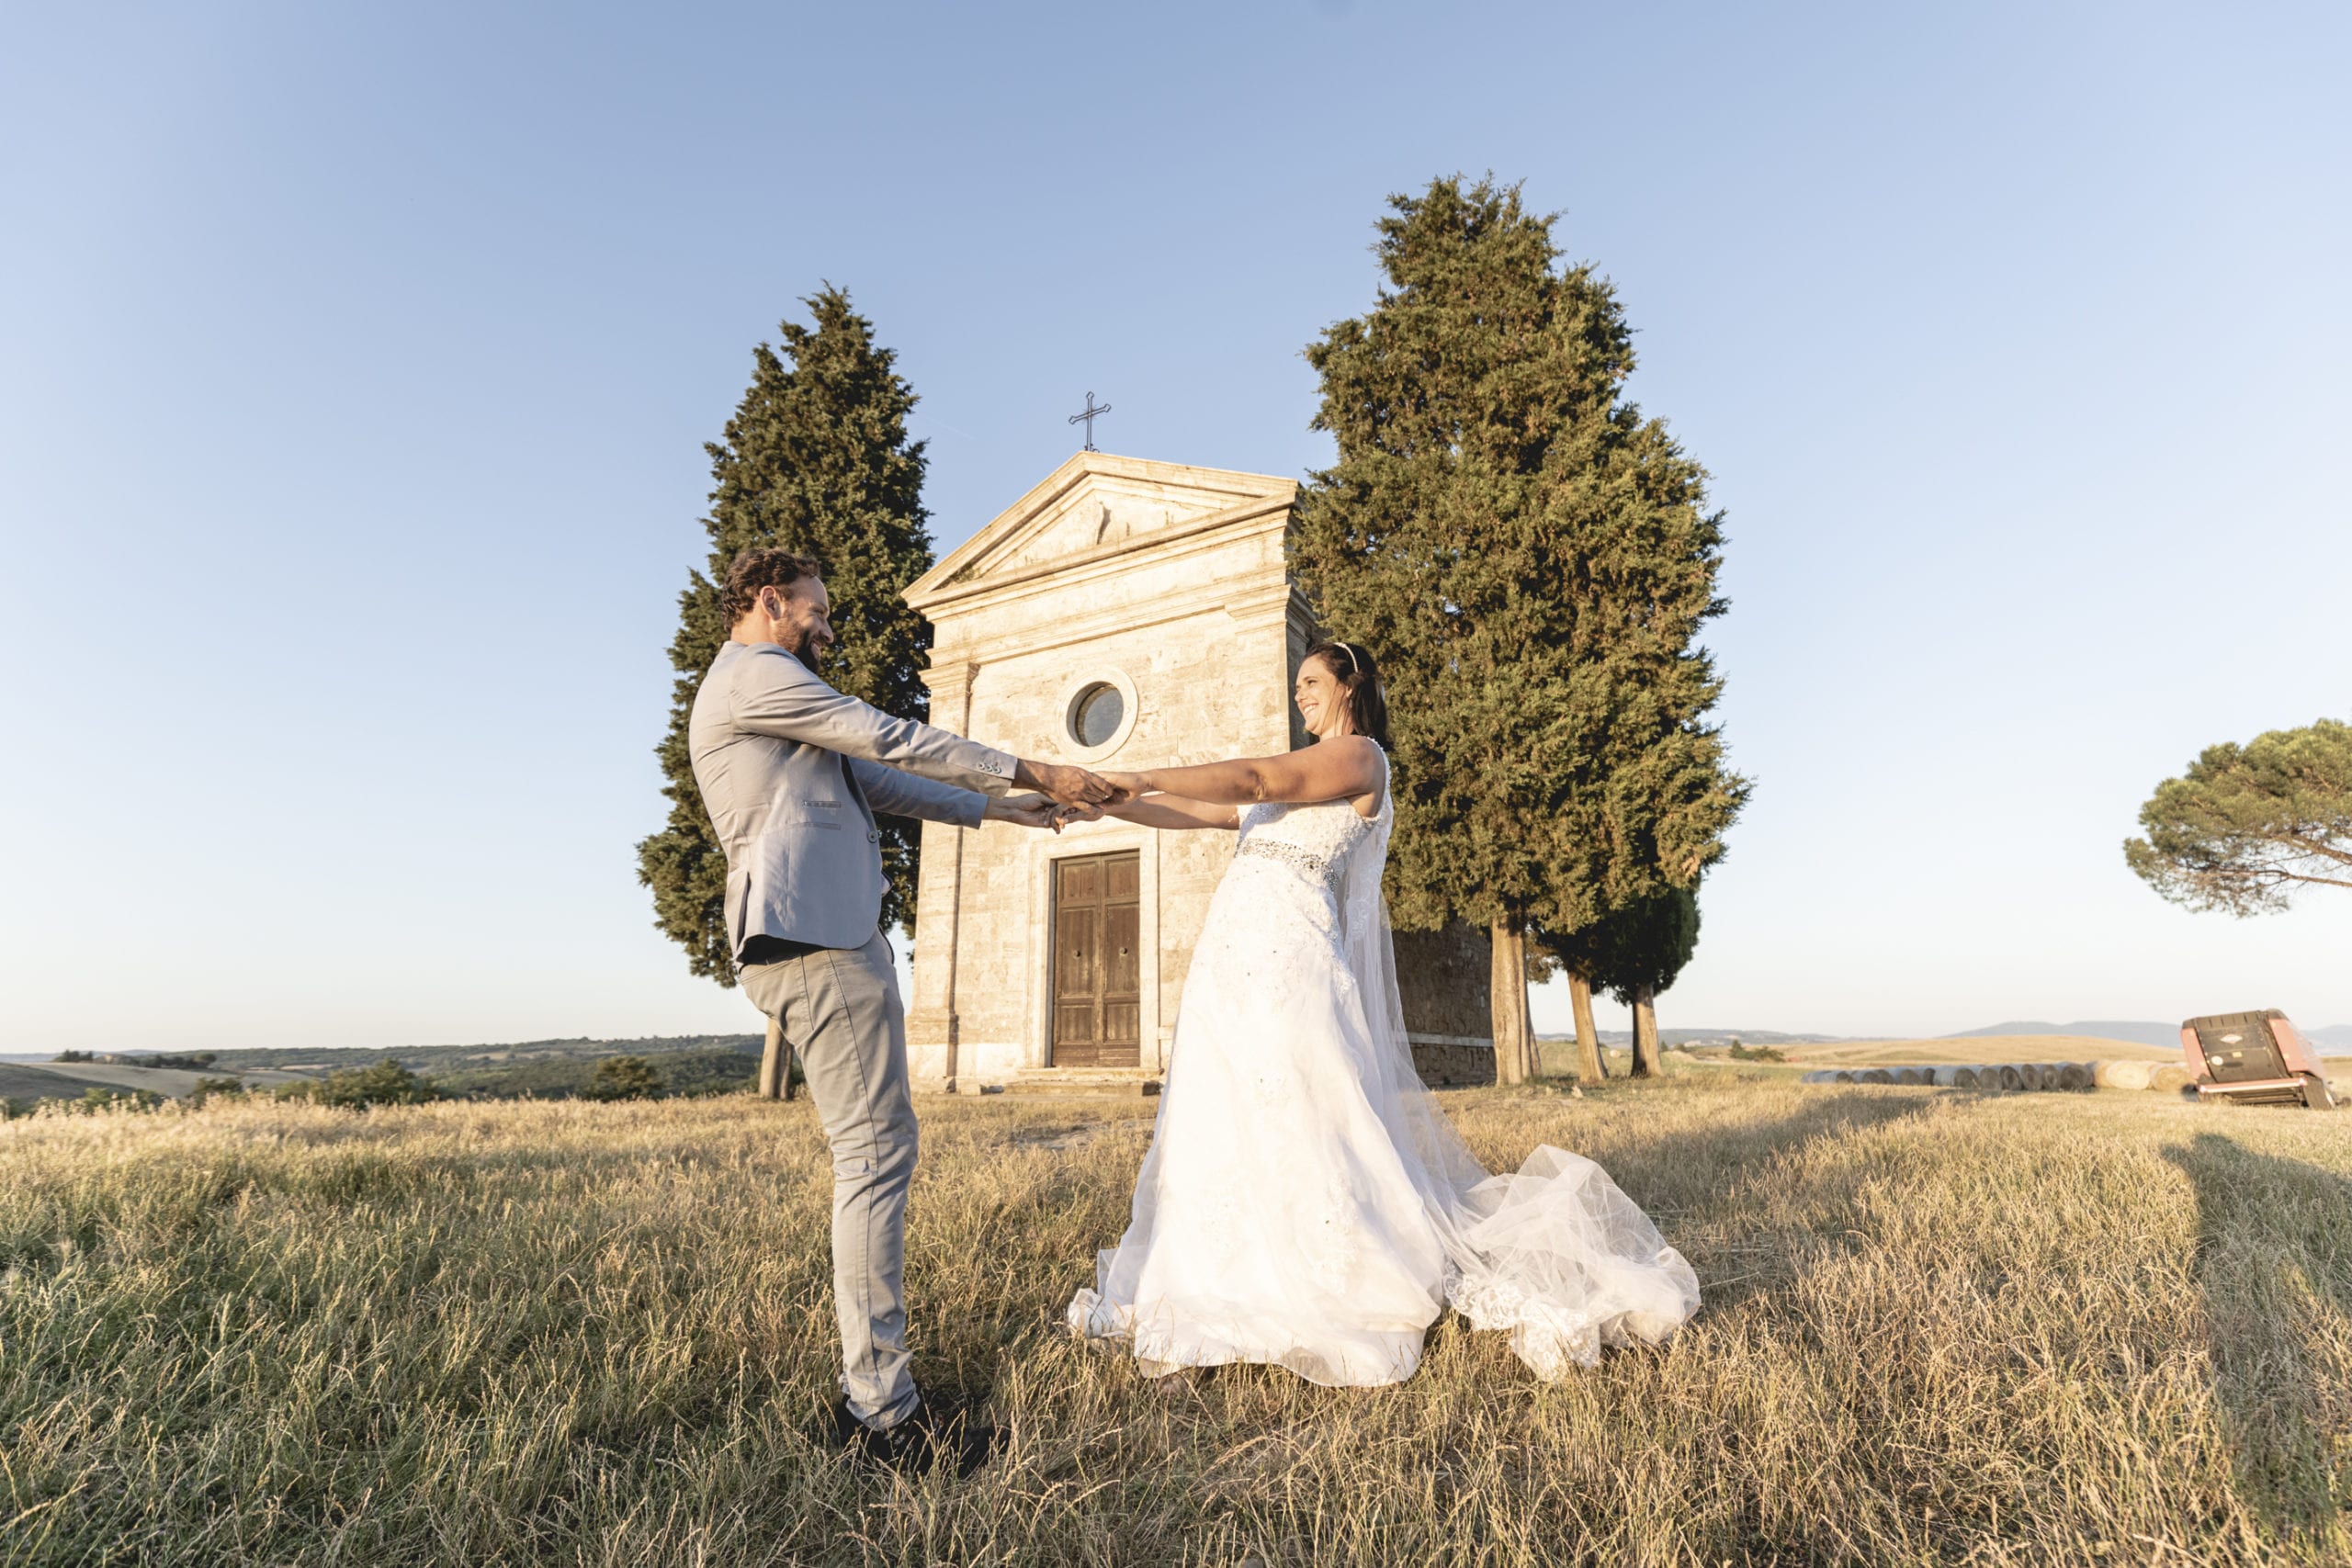 YES WEDDING ITALY VOWS RENEWAL SANT'ANTIMO ABBEY